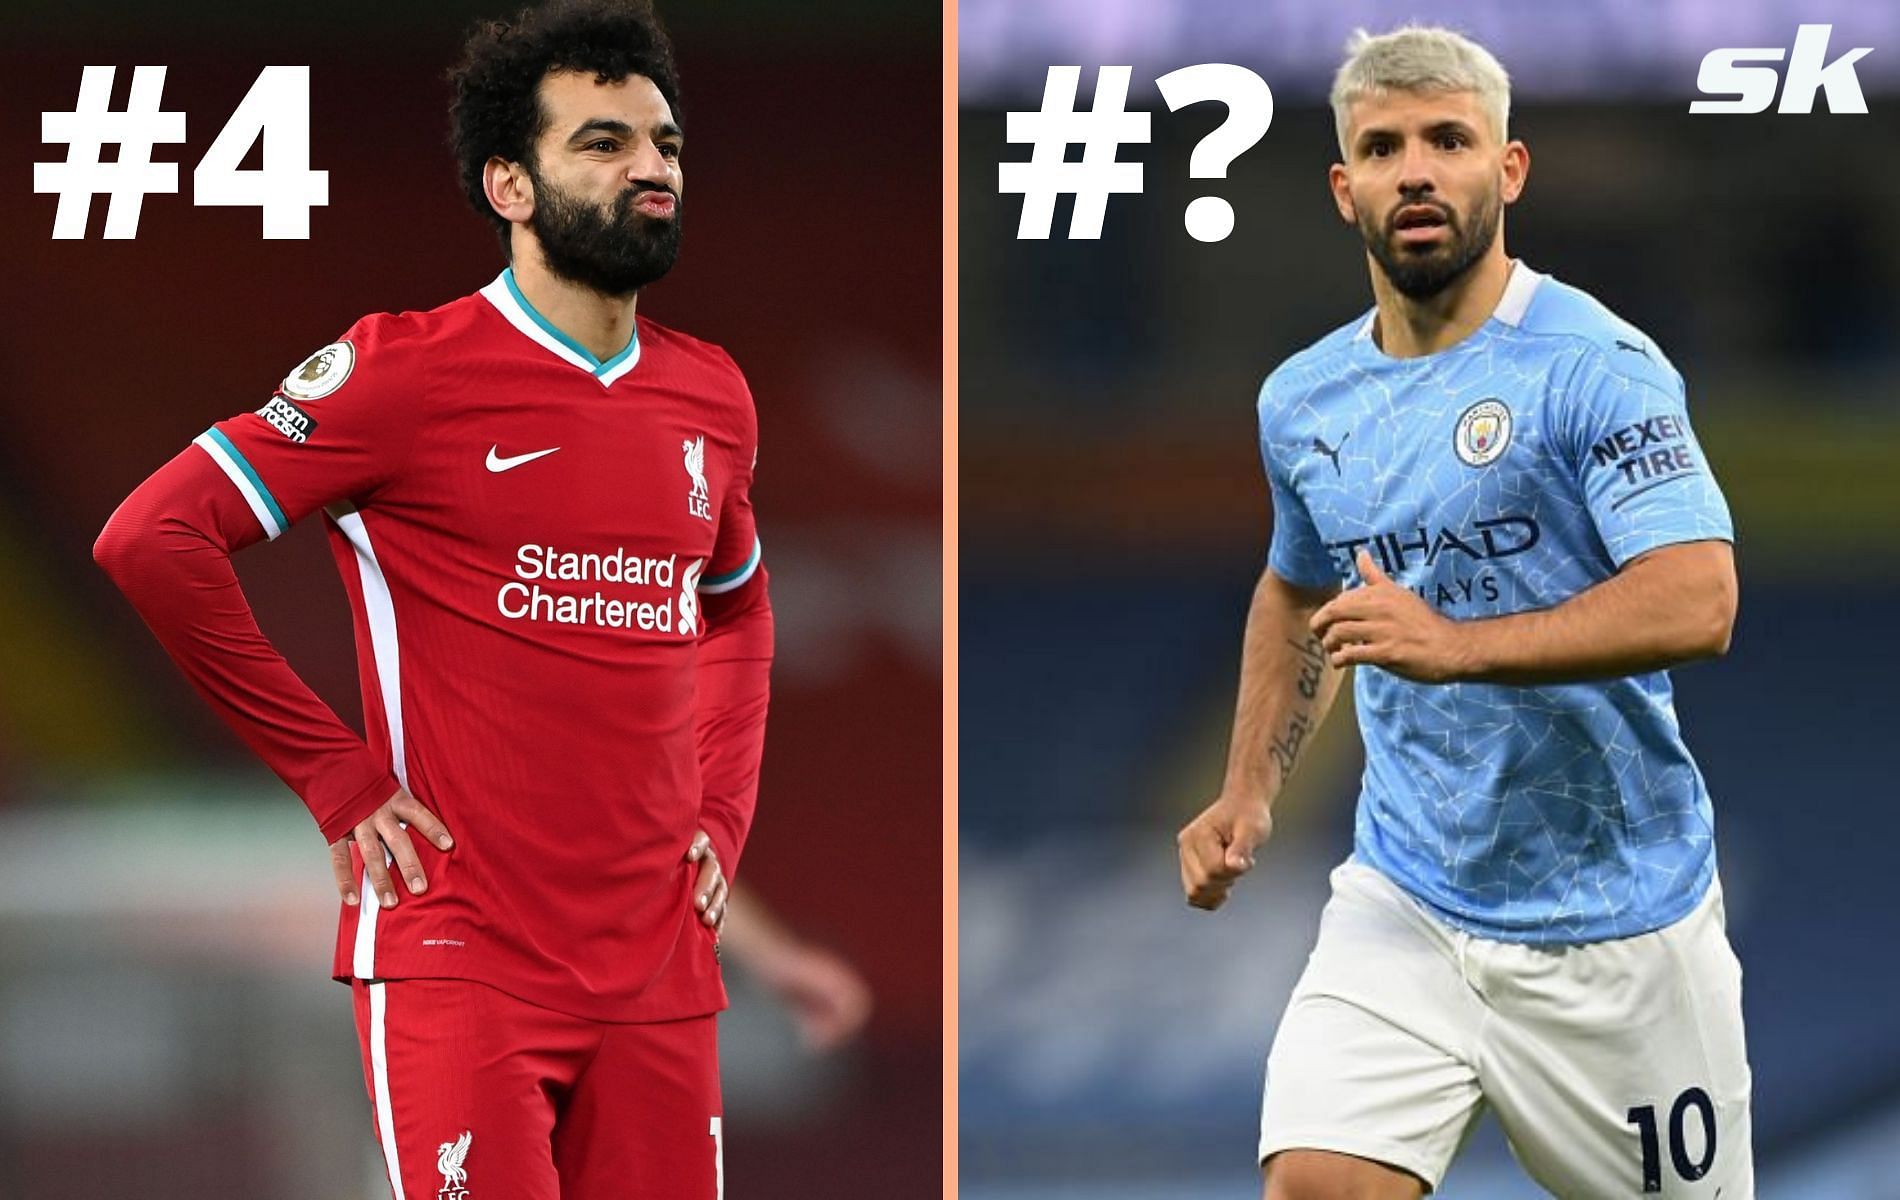 Salah and Aguero are among the most consistent and reliable forwards in Premier League history